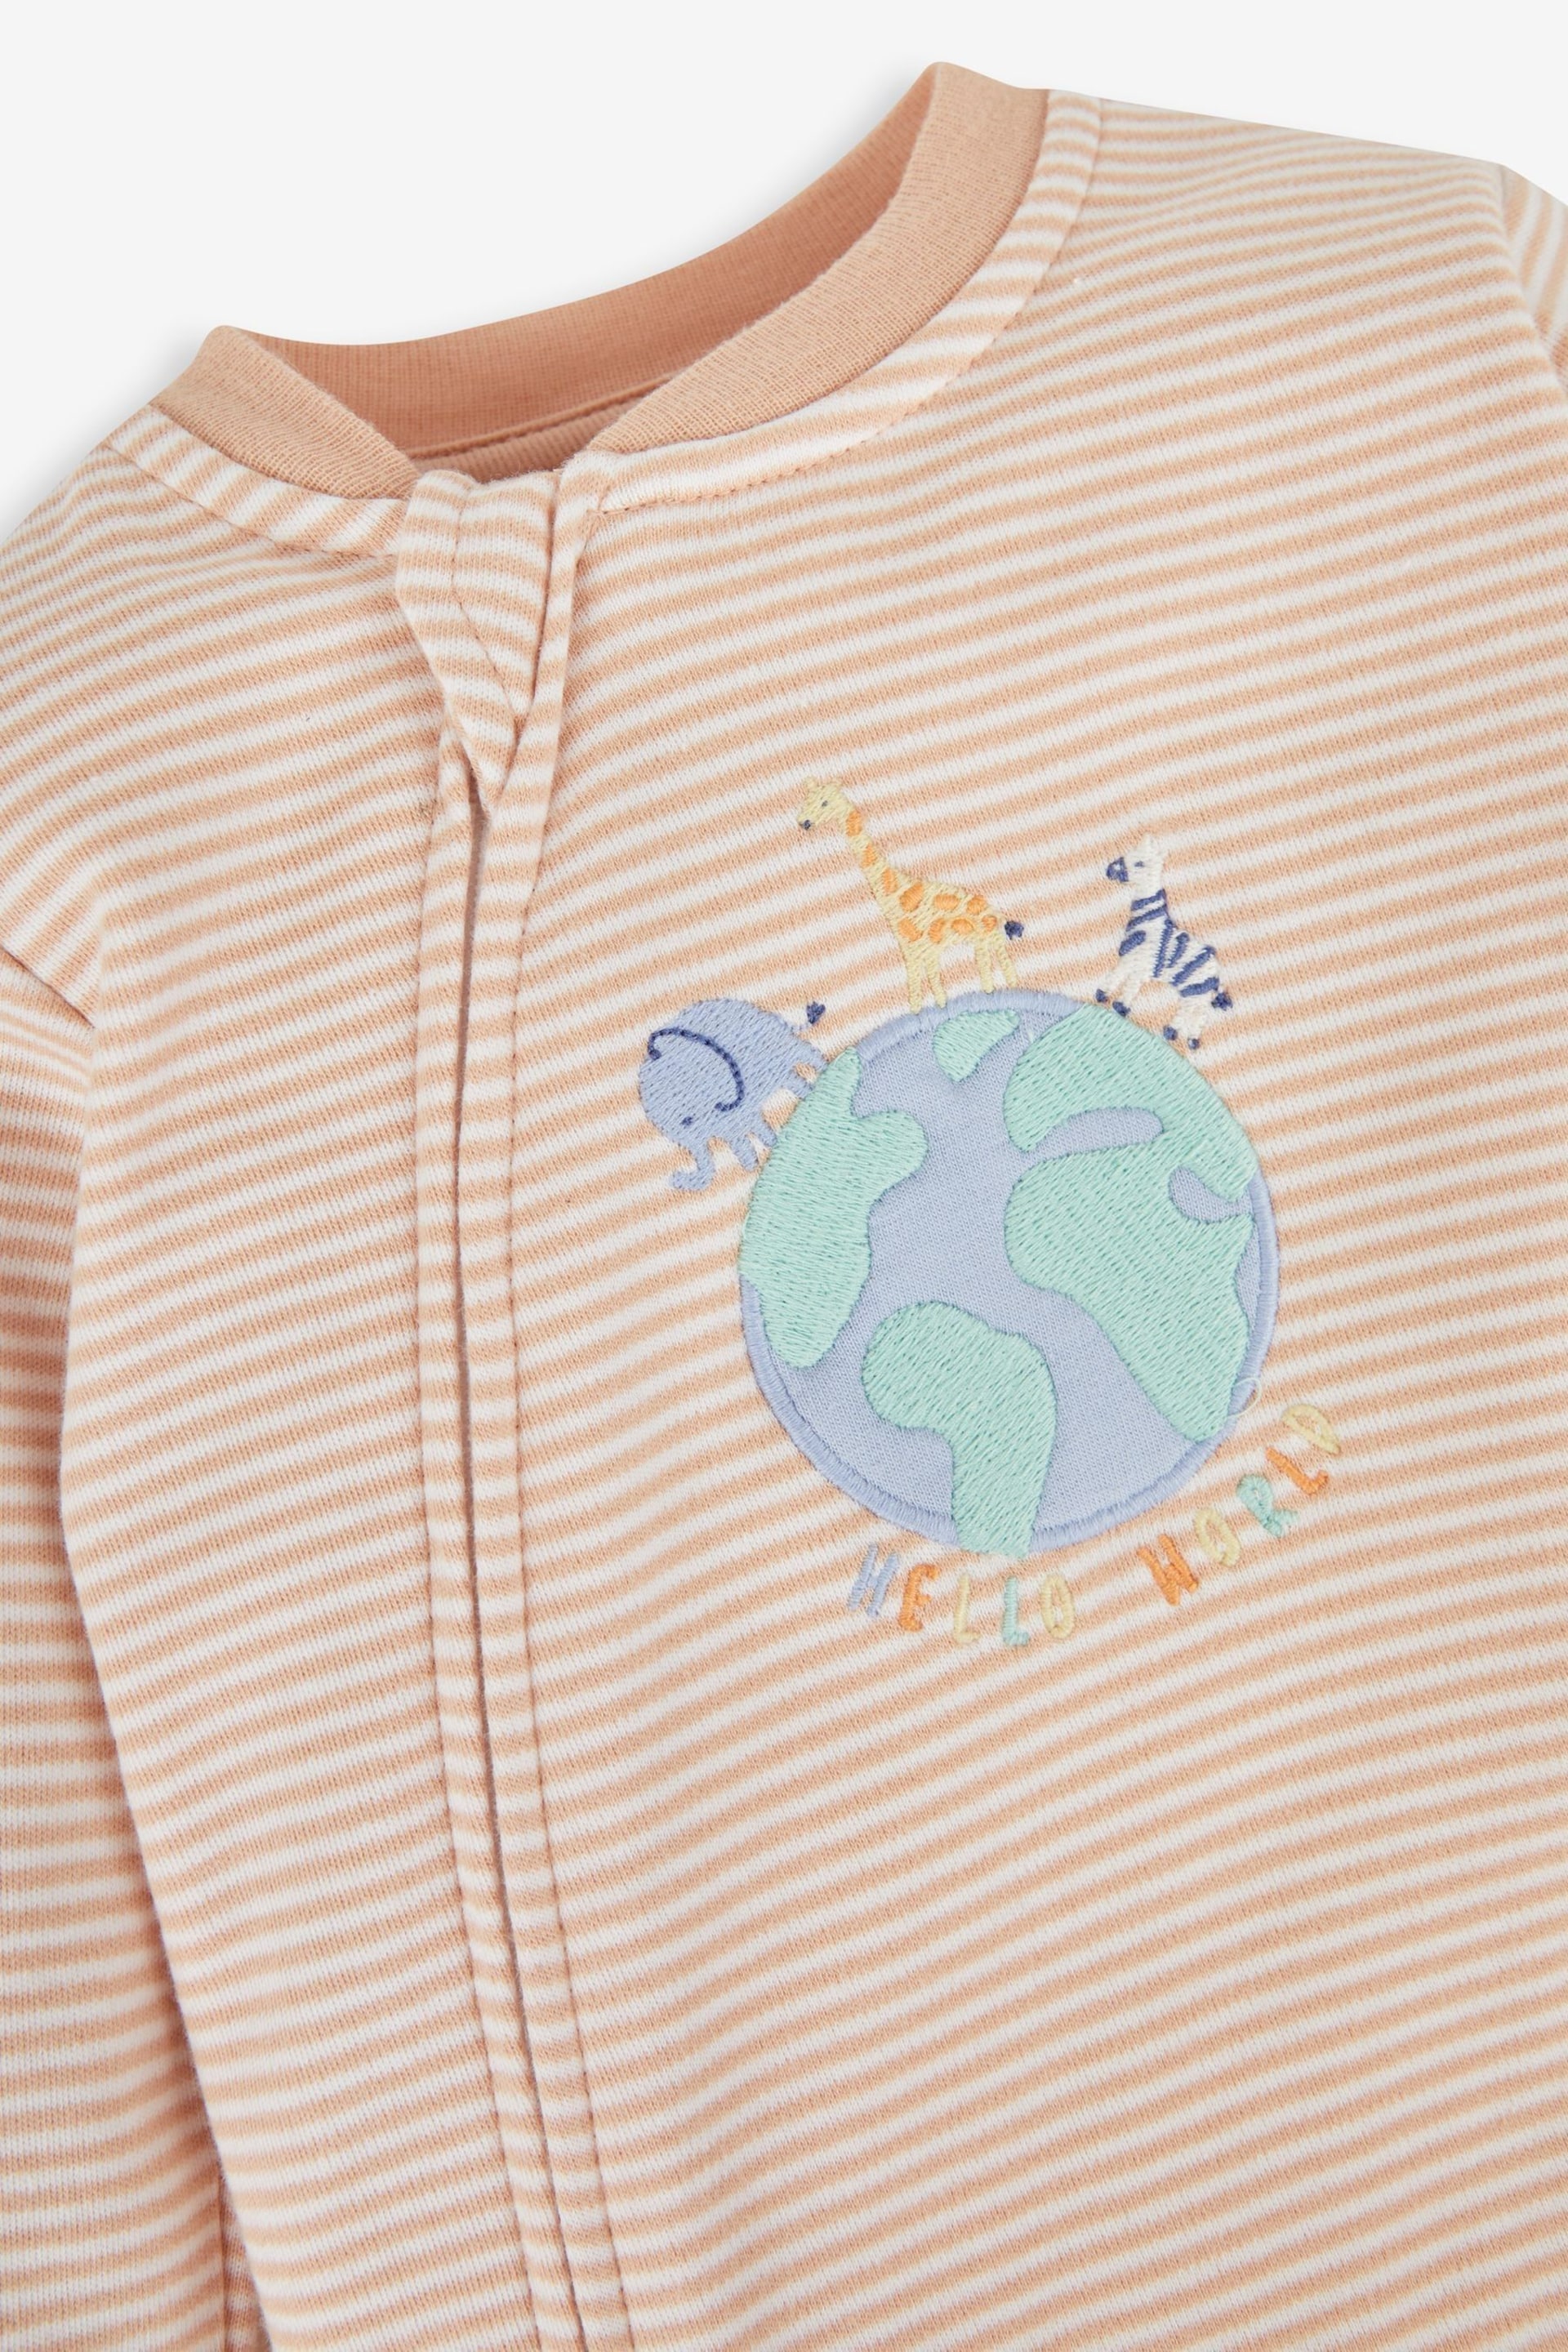 JoJo Maman Bébé Natural Hello World Embroidered Cotton Zip Baby Sleepsuit - Image 2 of 3